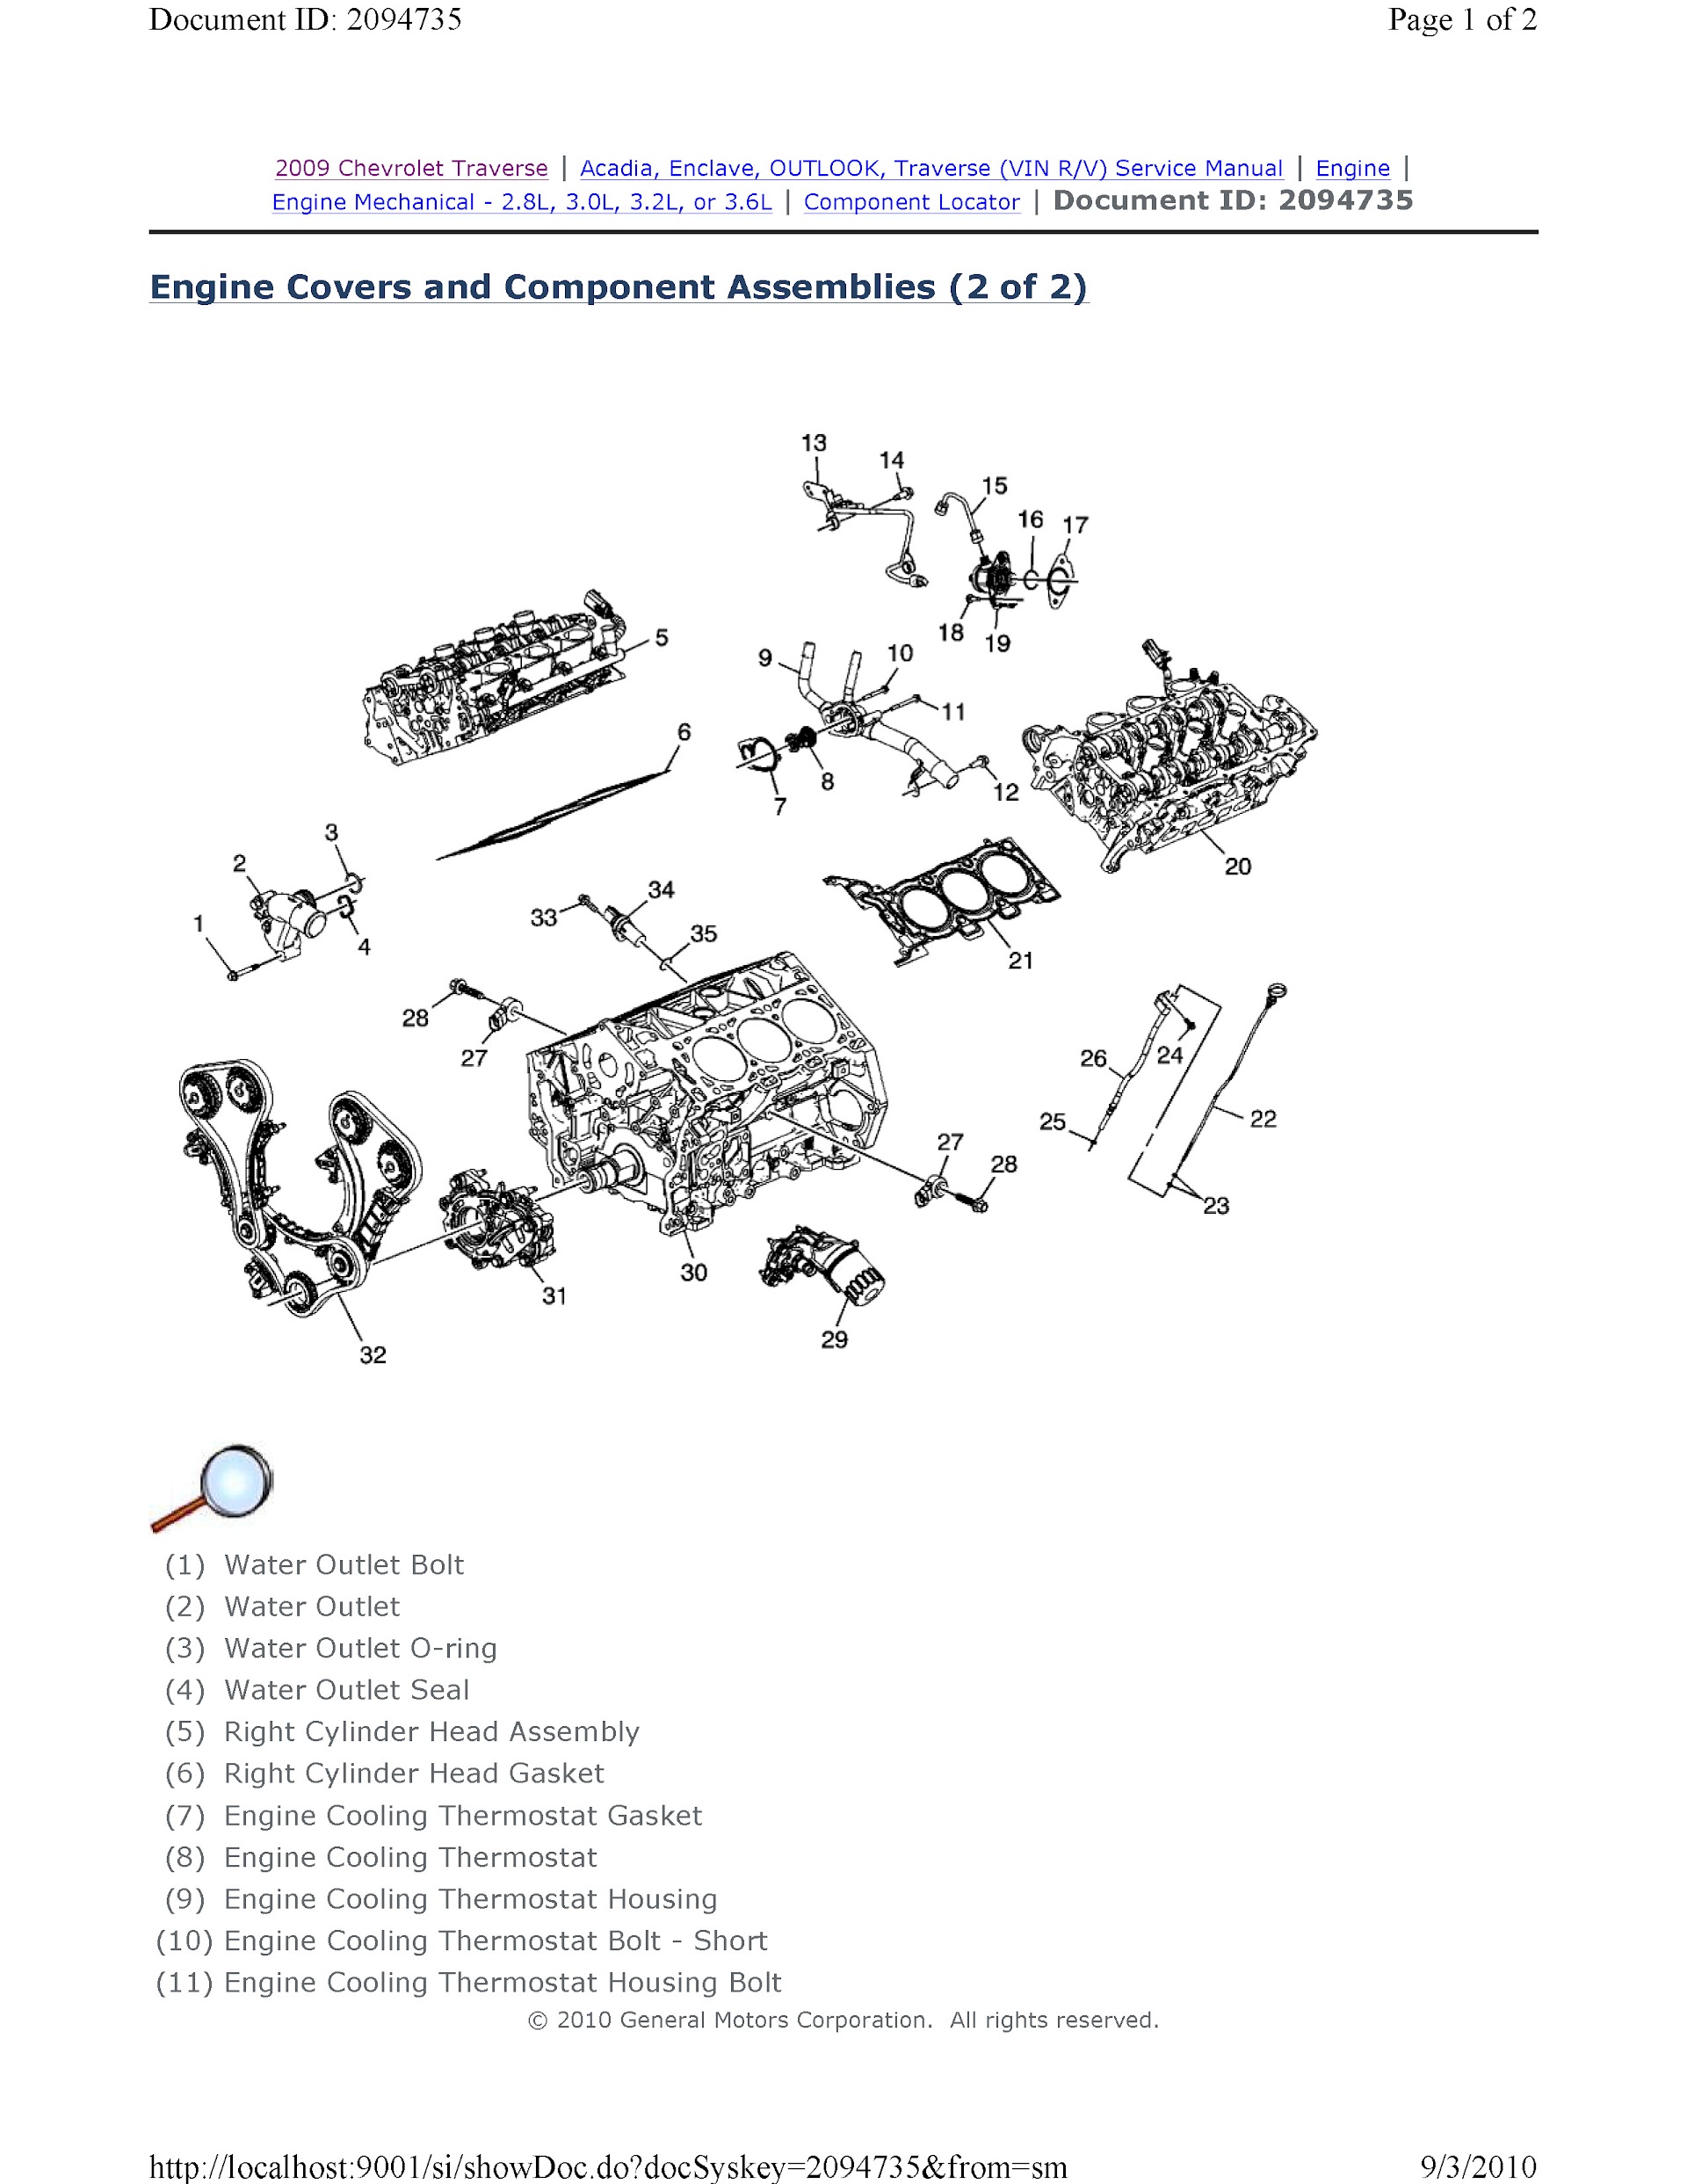 CONTENTS: 2009-2010 Chevrolet Traverse Repair Manual, Engine Mechanical Components